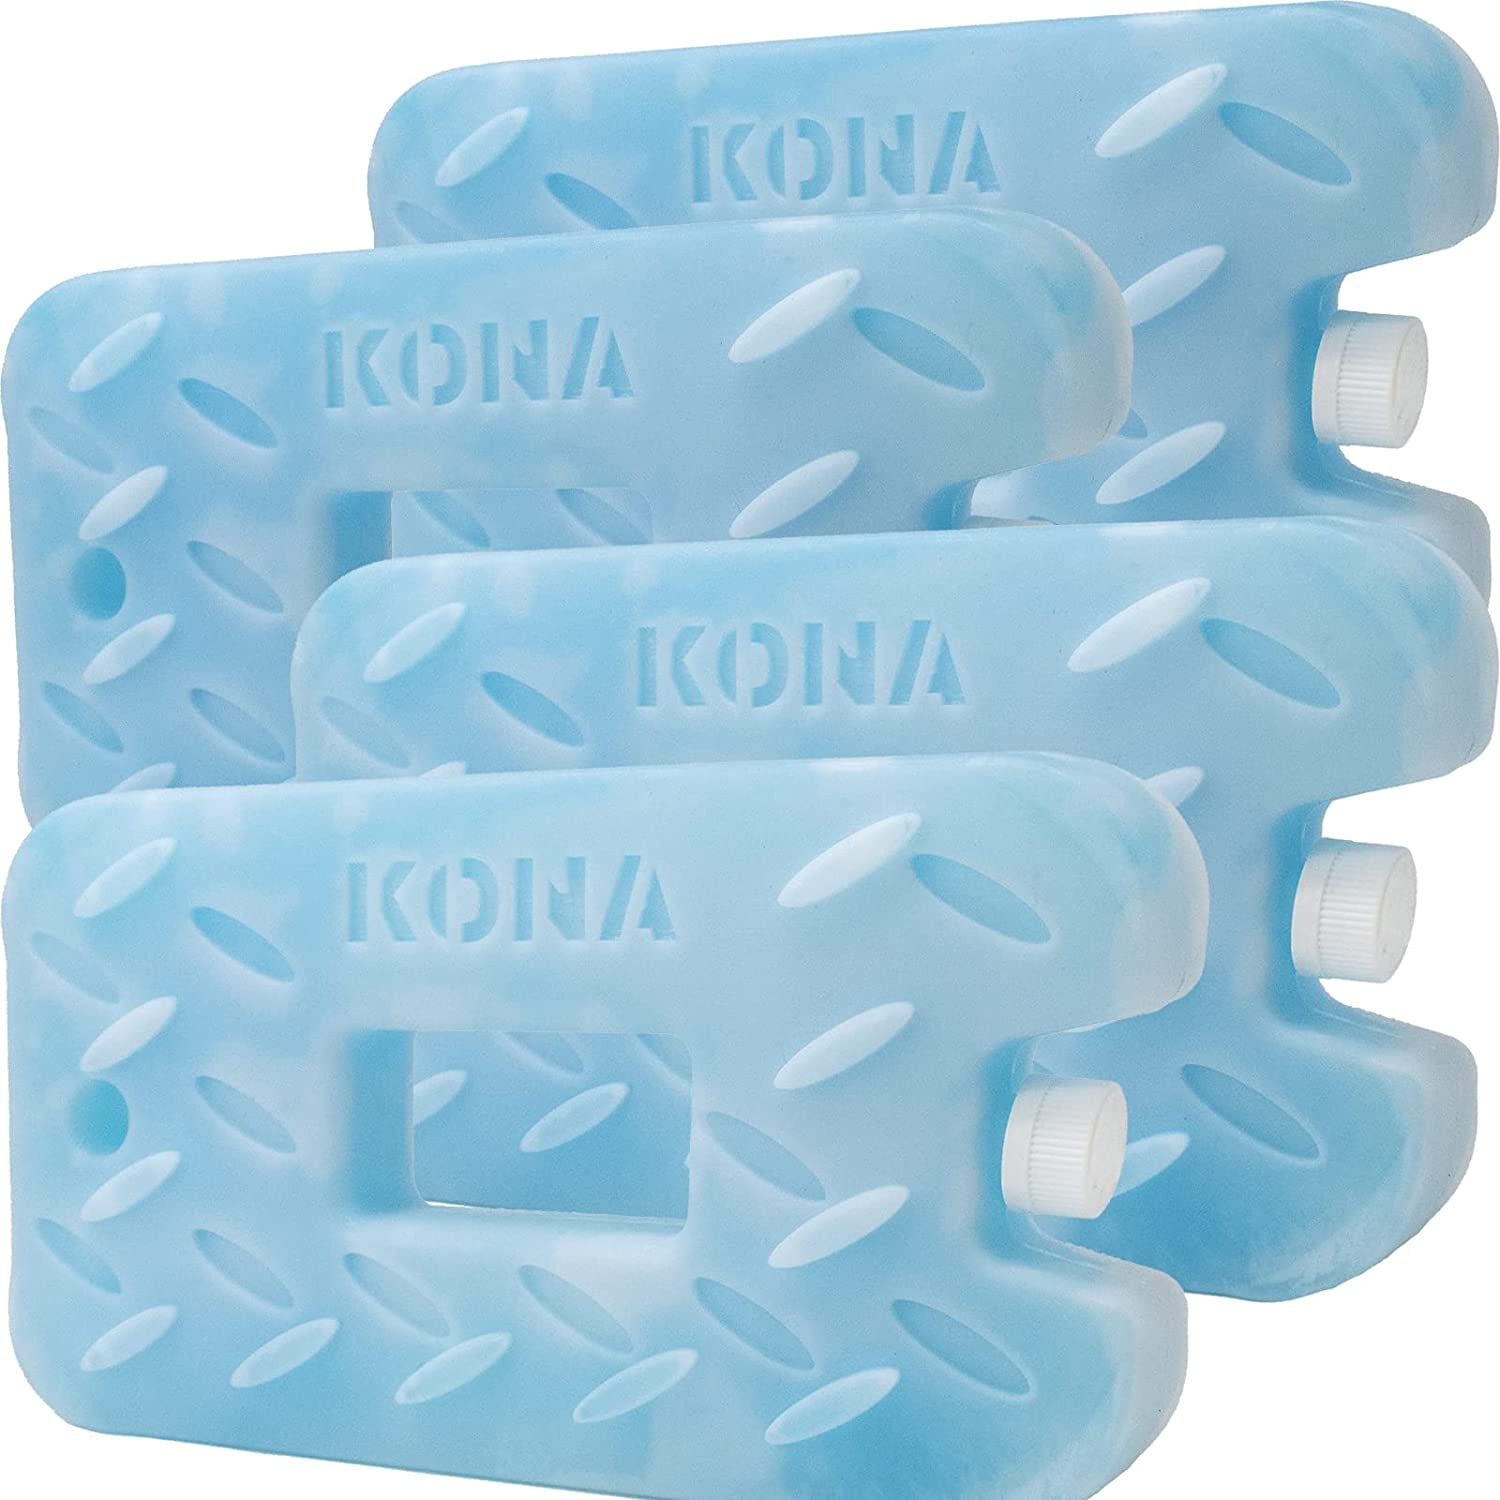 Kona XL 4 lb. Blue Ice Pack for Coolers - Extreme Long Lasting (-5C) Gel - Refreezable, Reusable 3 / Ready to Use